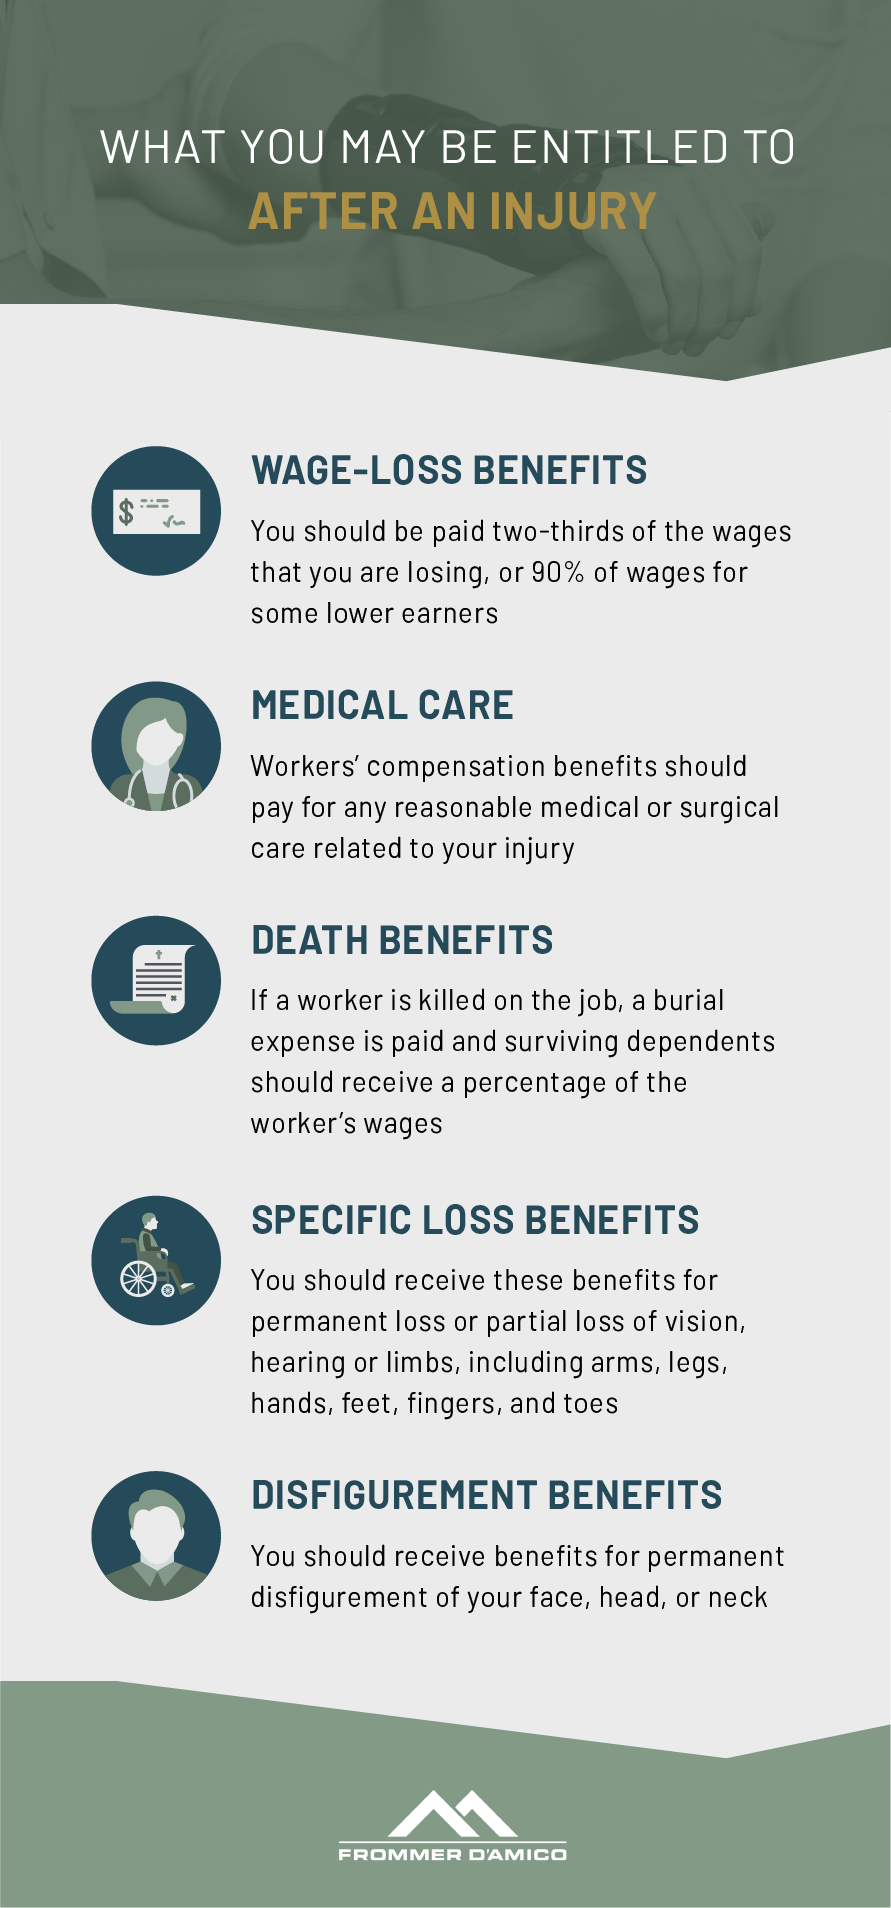 Types of Benefits You May Be Entitled to After Being Injured on the Job